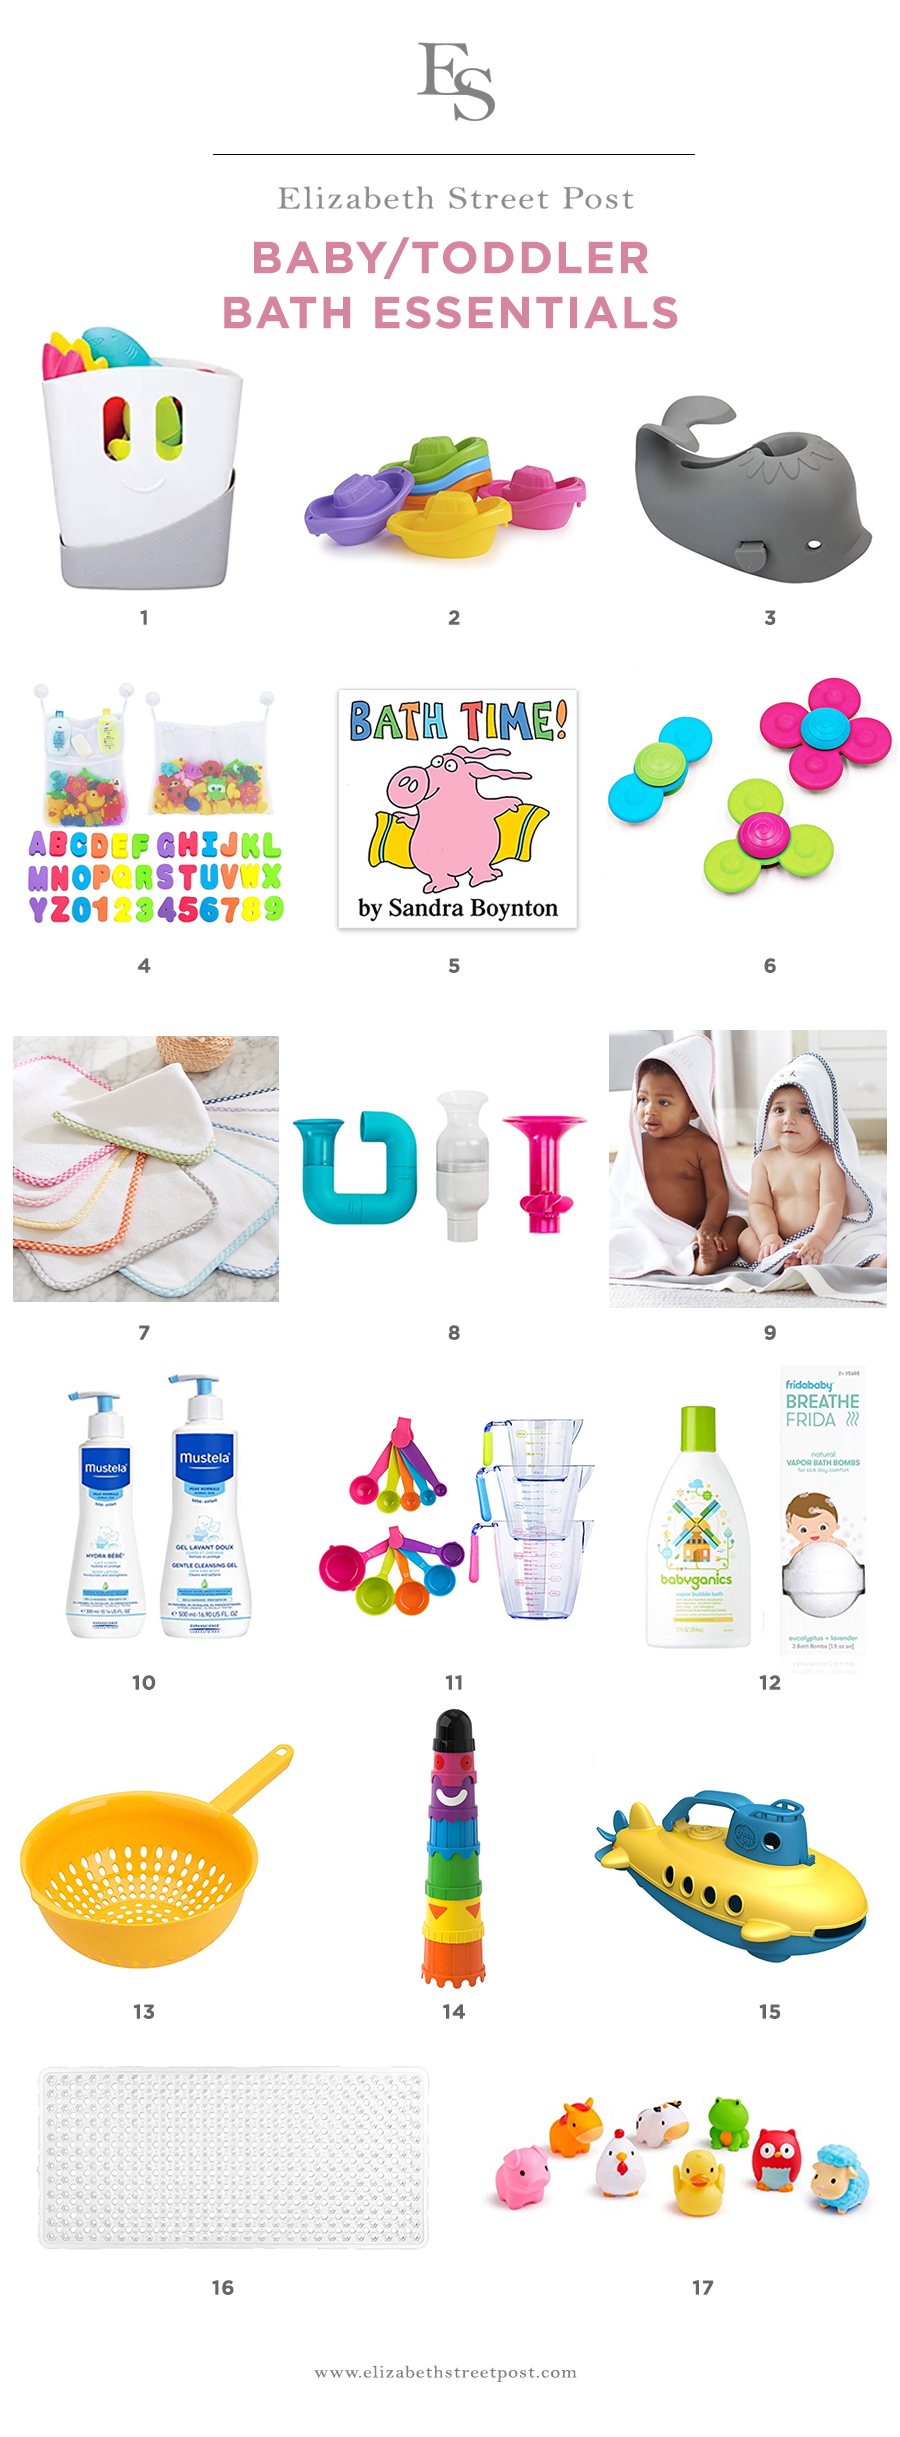 Bath Essentials for Babies and Toddlers - Elizabeth Street Post